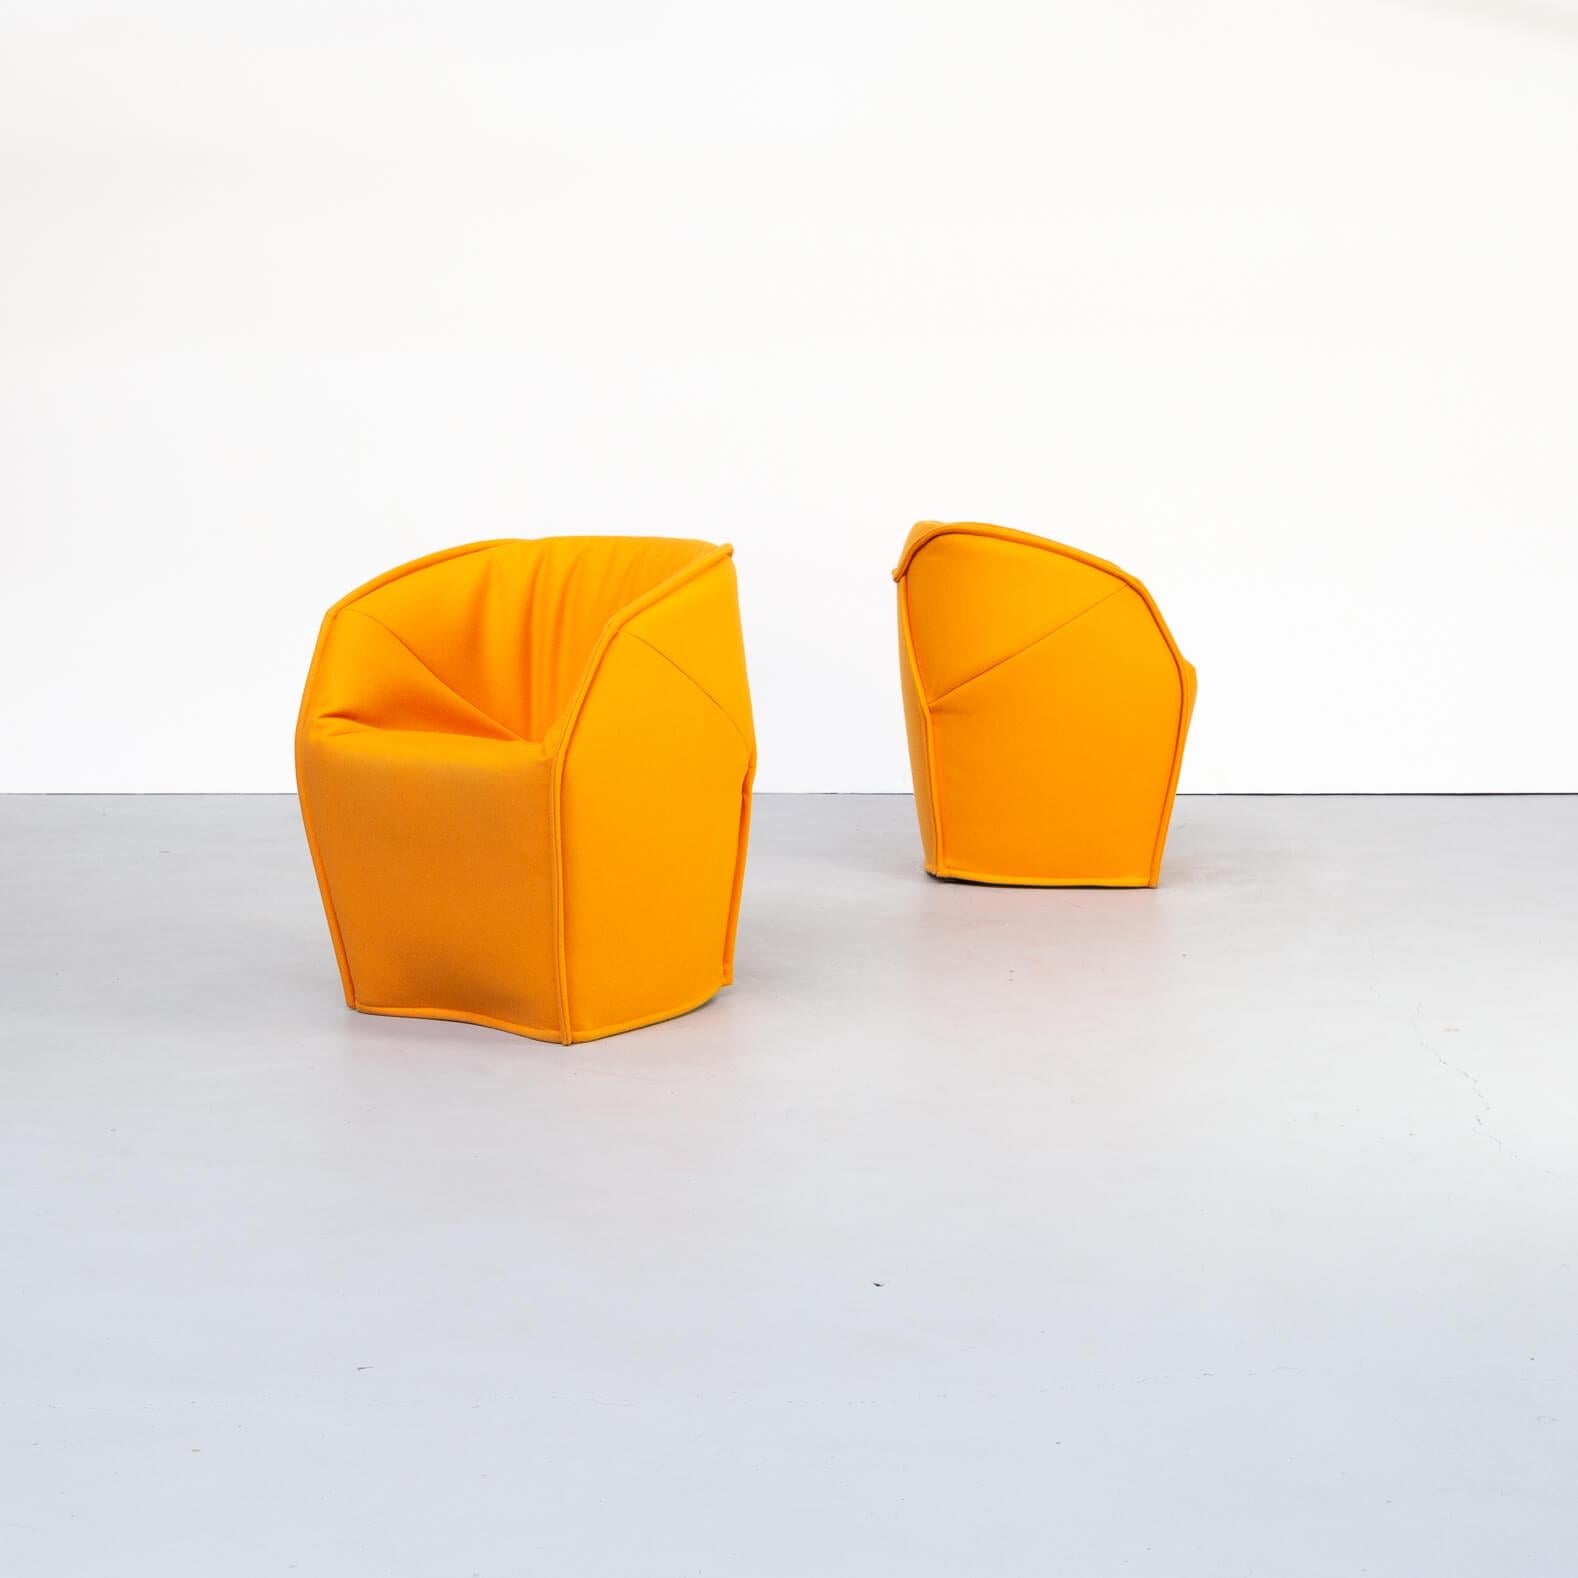 M.a.s.s..a.s stands for ‘Moroso Asymmetric Sofa System Adorably Stitched’. Patricia Urquiola:
Blunt blocks rounded and smoothed by some imaginary blade. Geometric order is broken, swept away by a movement, a line which follows the contour. The